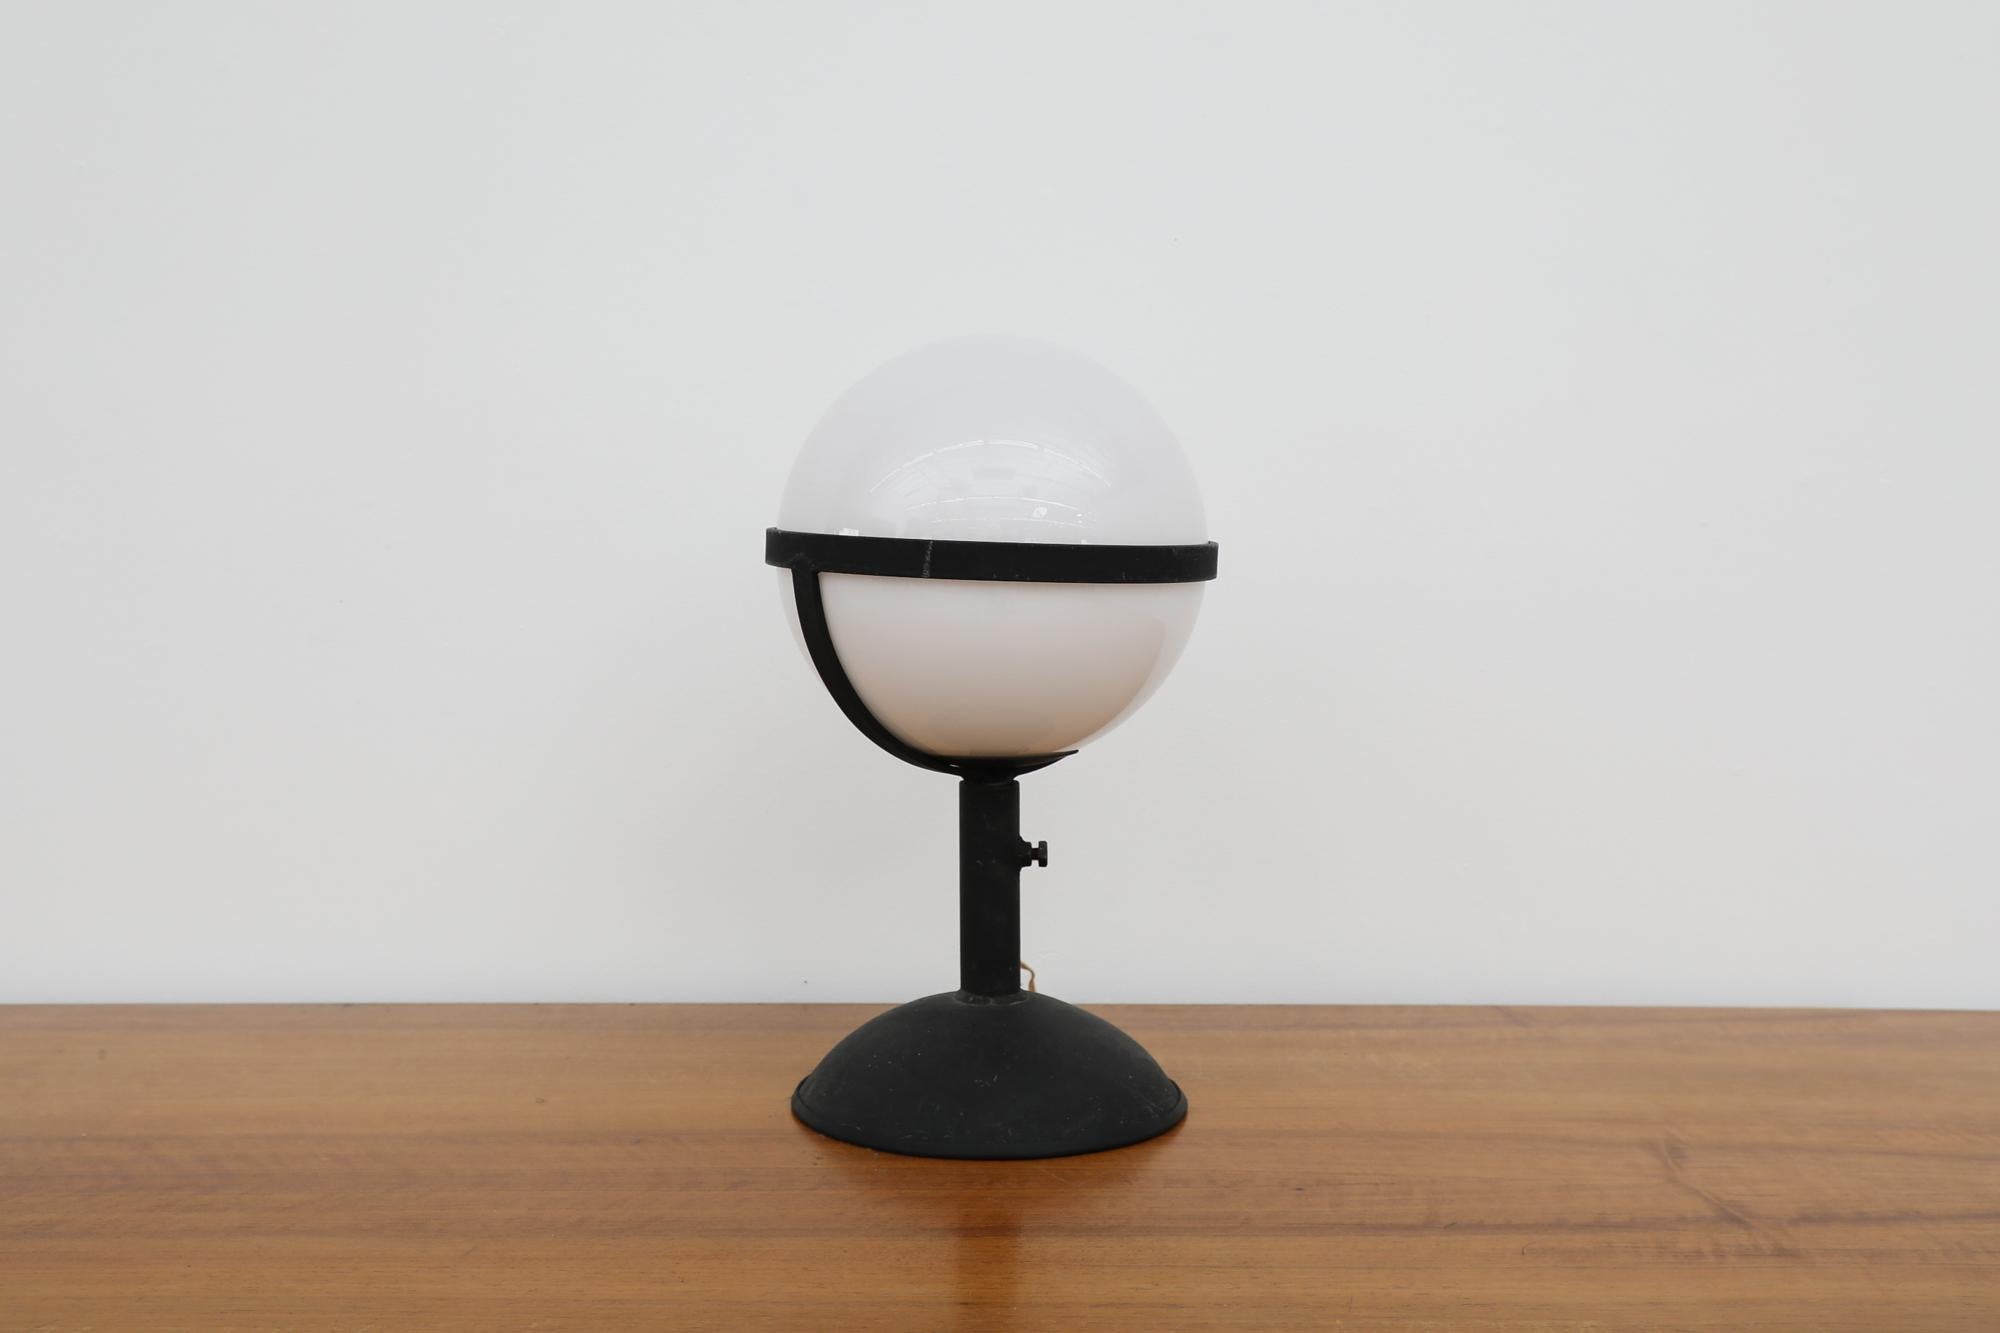 Brutalist table lamp with heavy steel pedestal base and delicate blown opaline globe shade. In original condition with visible wear consistent with its age and use.